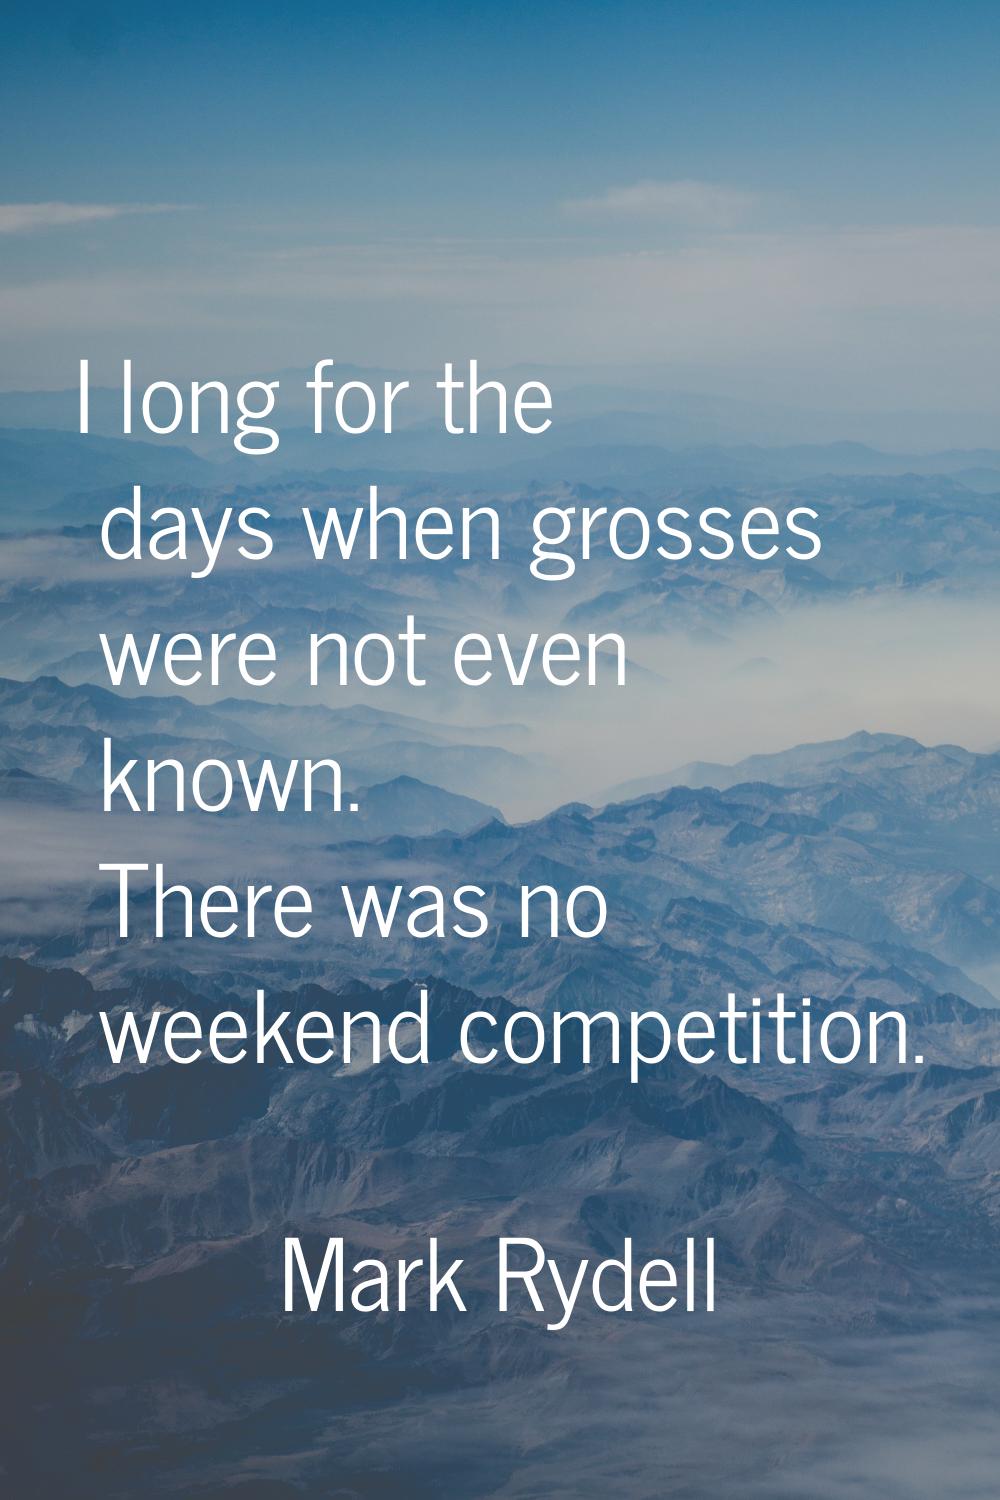 I long for the days when grosses were not even known. There was no weekend competition.